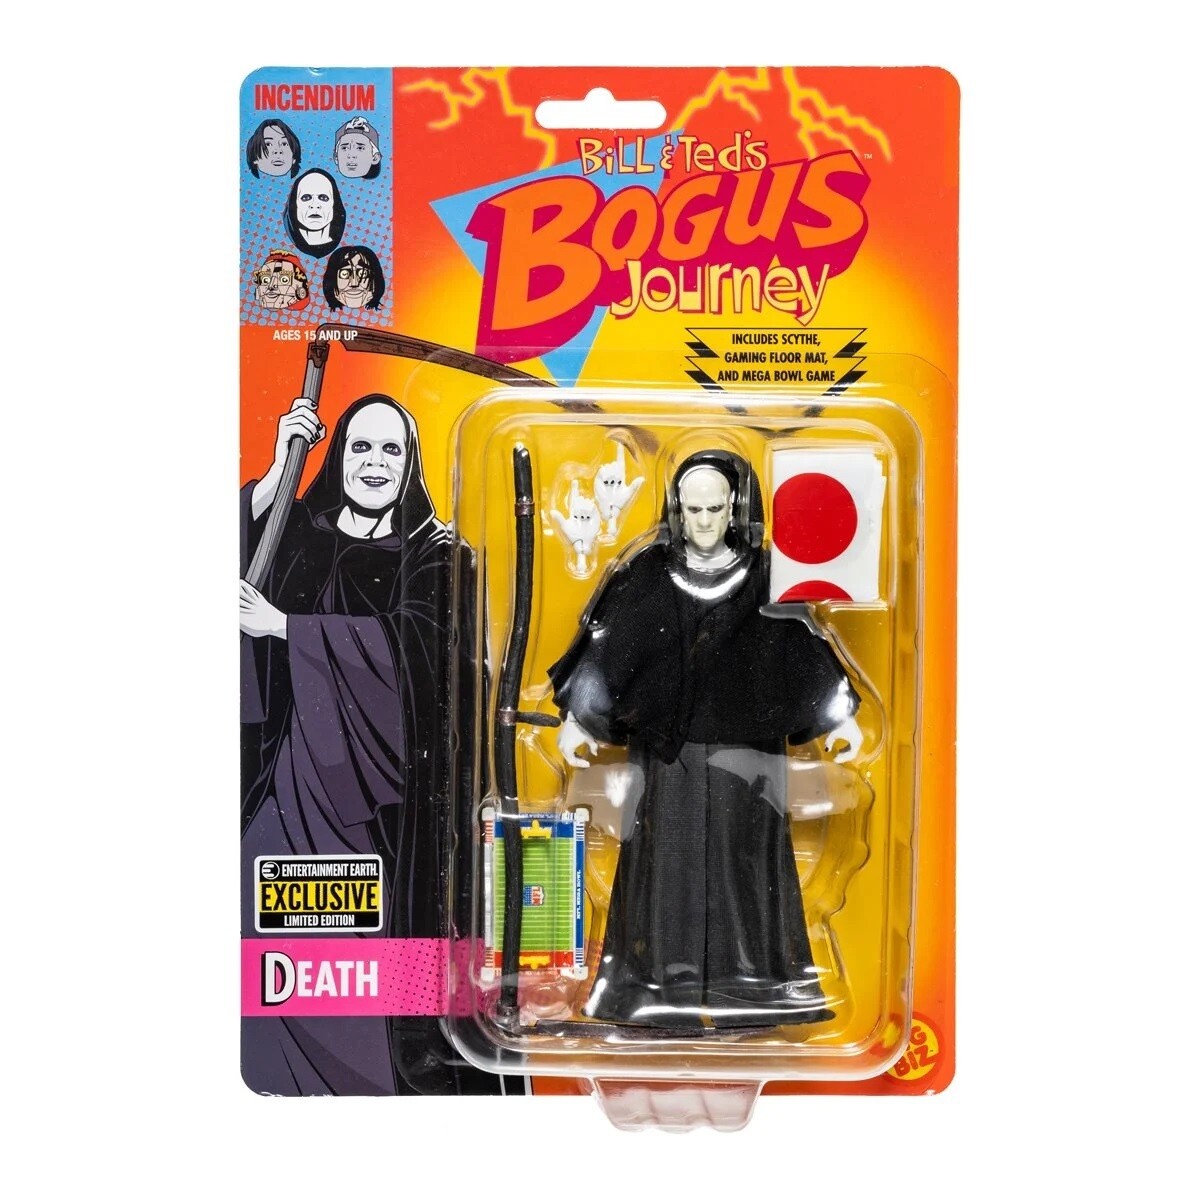 Bill & Ted's Bogus Journey - Death 5 1/2"H GLOW IN THE DARK Action Figure - Entertainment Earth Exclusive